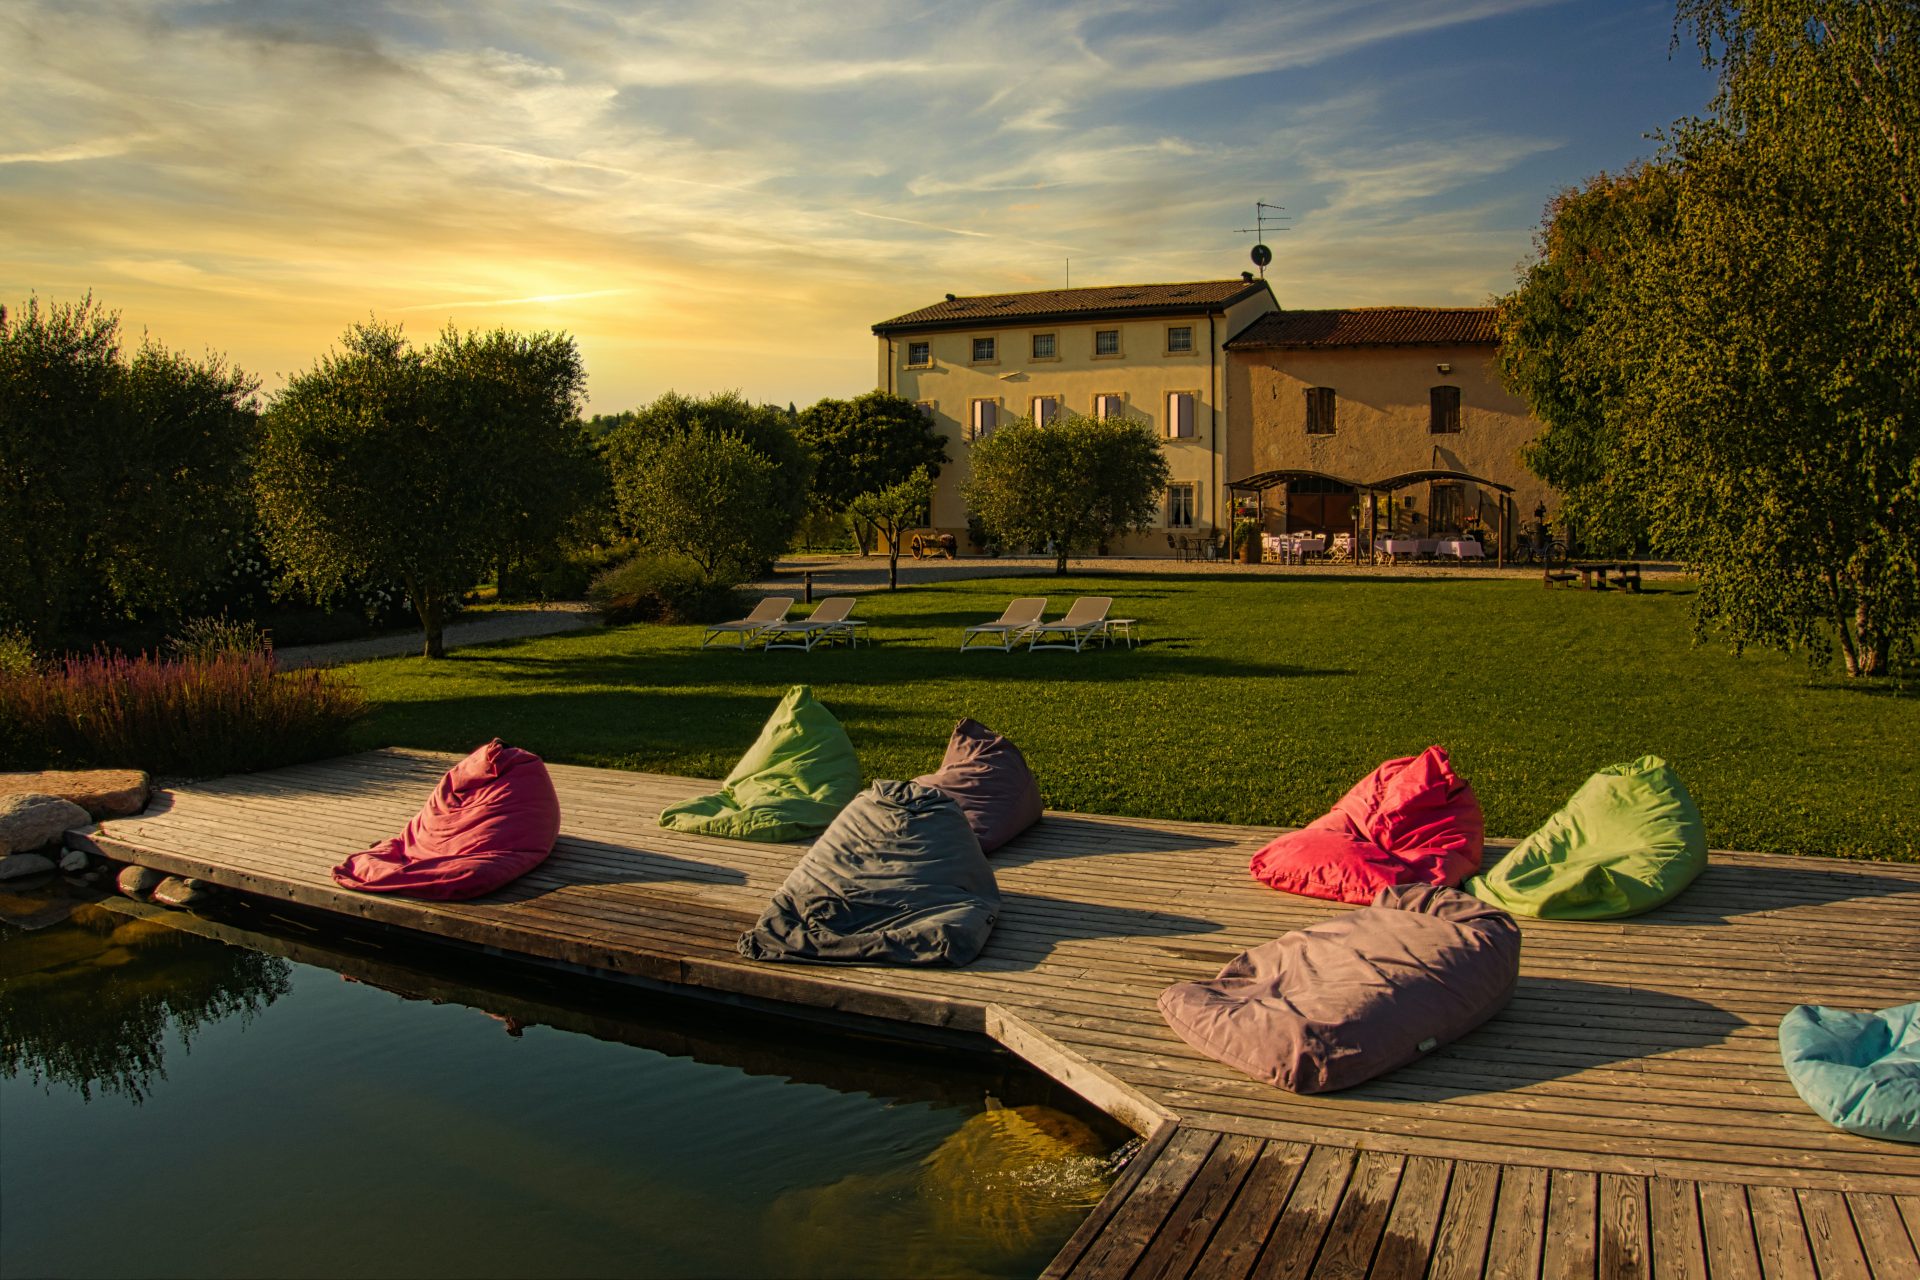 Beanbags infront of a swimming pool in the gardens of a beautiful country property